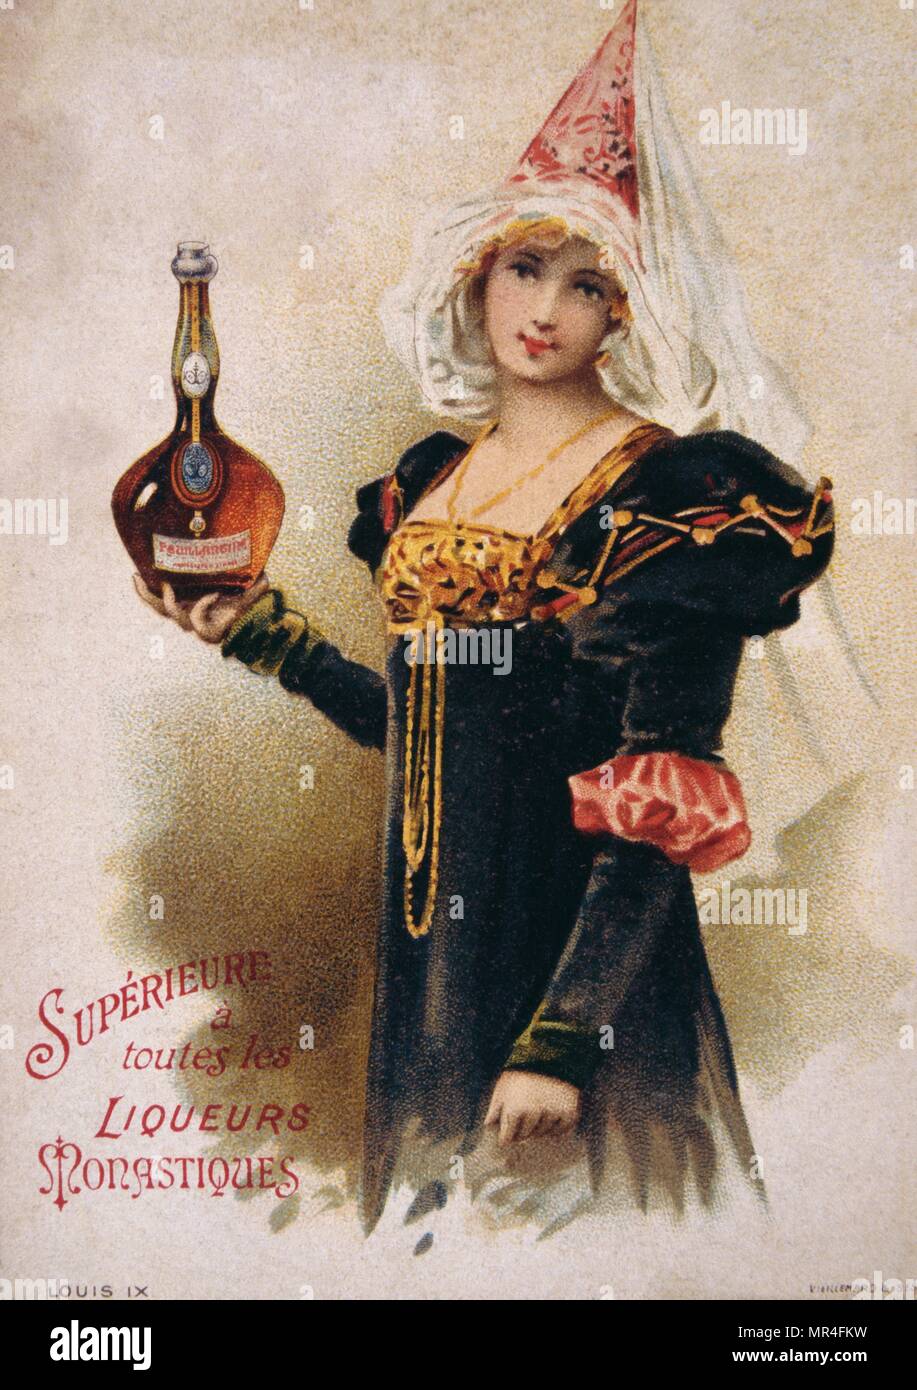 French postcard with image of a medieval costumed woman holding a bottle of liqueur Stock Photo